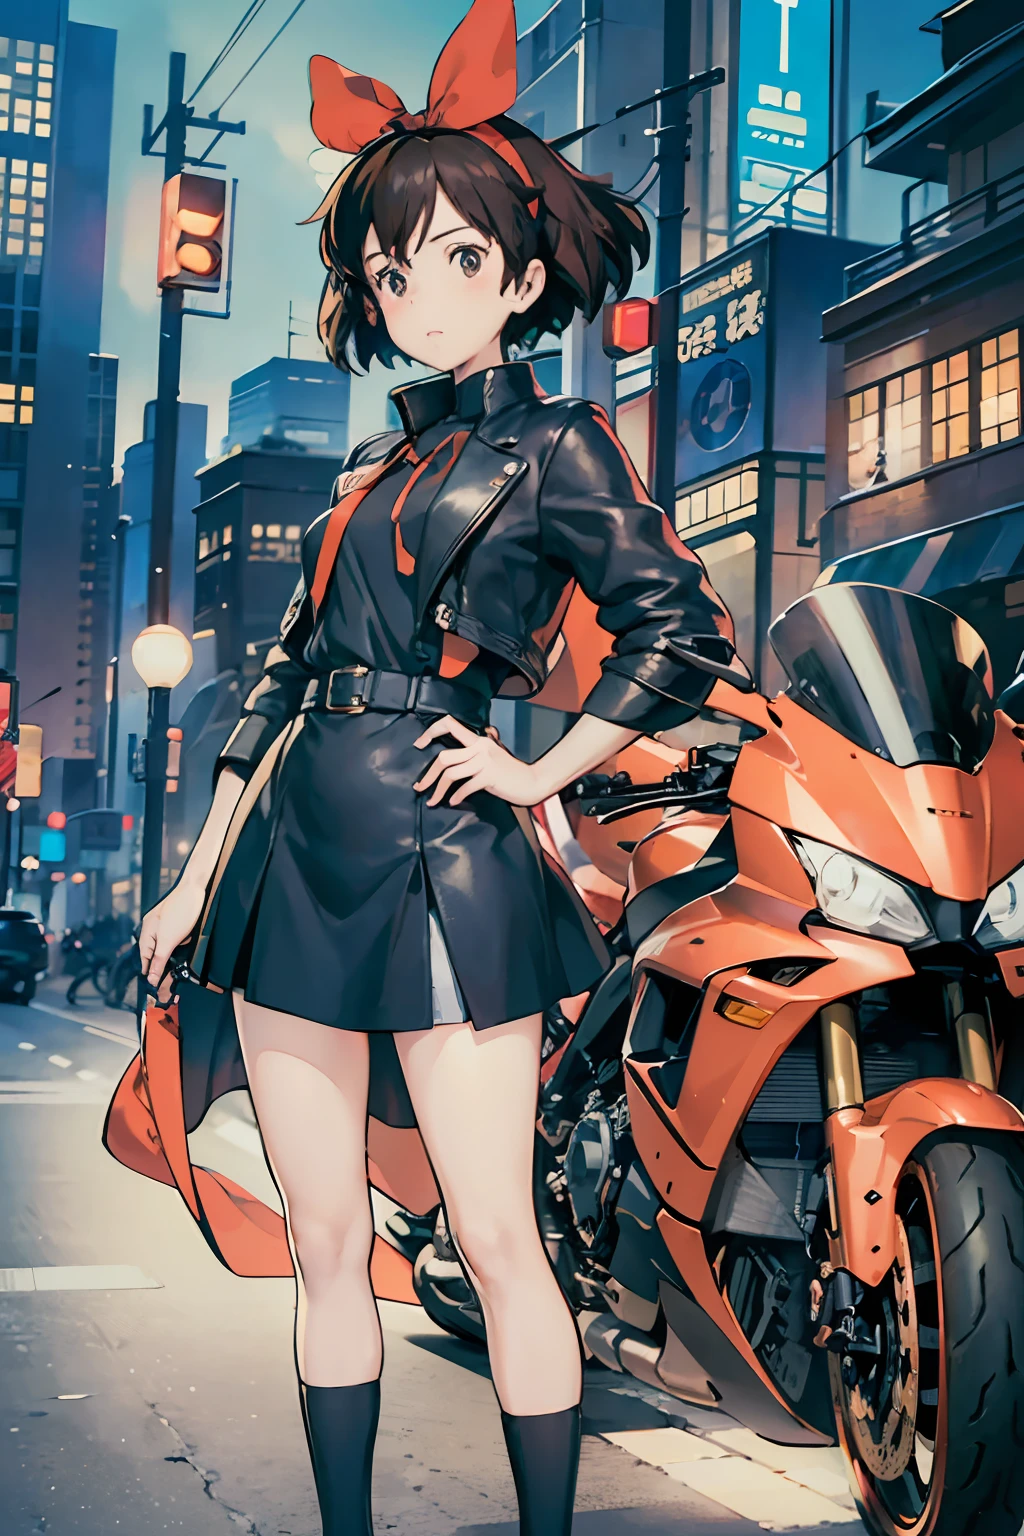 Best image quality, outstanding detail, ultra high resolution, (realism: 1.4), best illustration, prefer details, futuristic high-tech motorcycle, standing posture, Kiki posing in front of motorcycle, background is high-tech lighting scene of futuristic city, black coat, red ribbon, kiki, gigi, active,